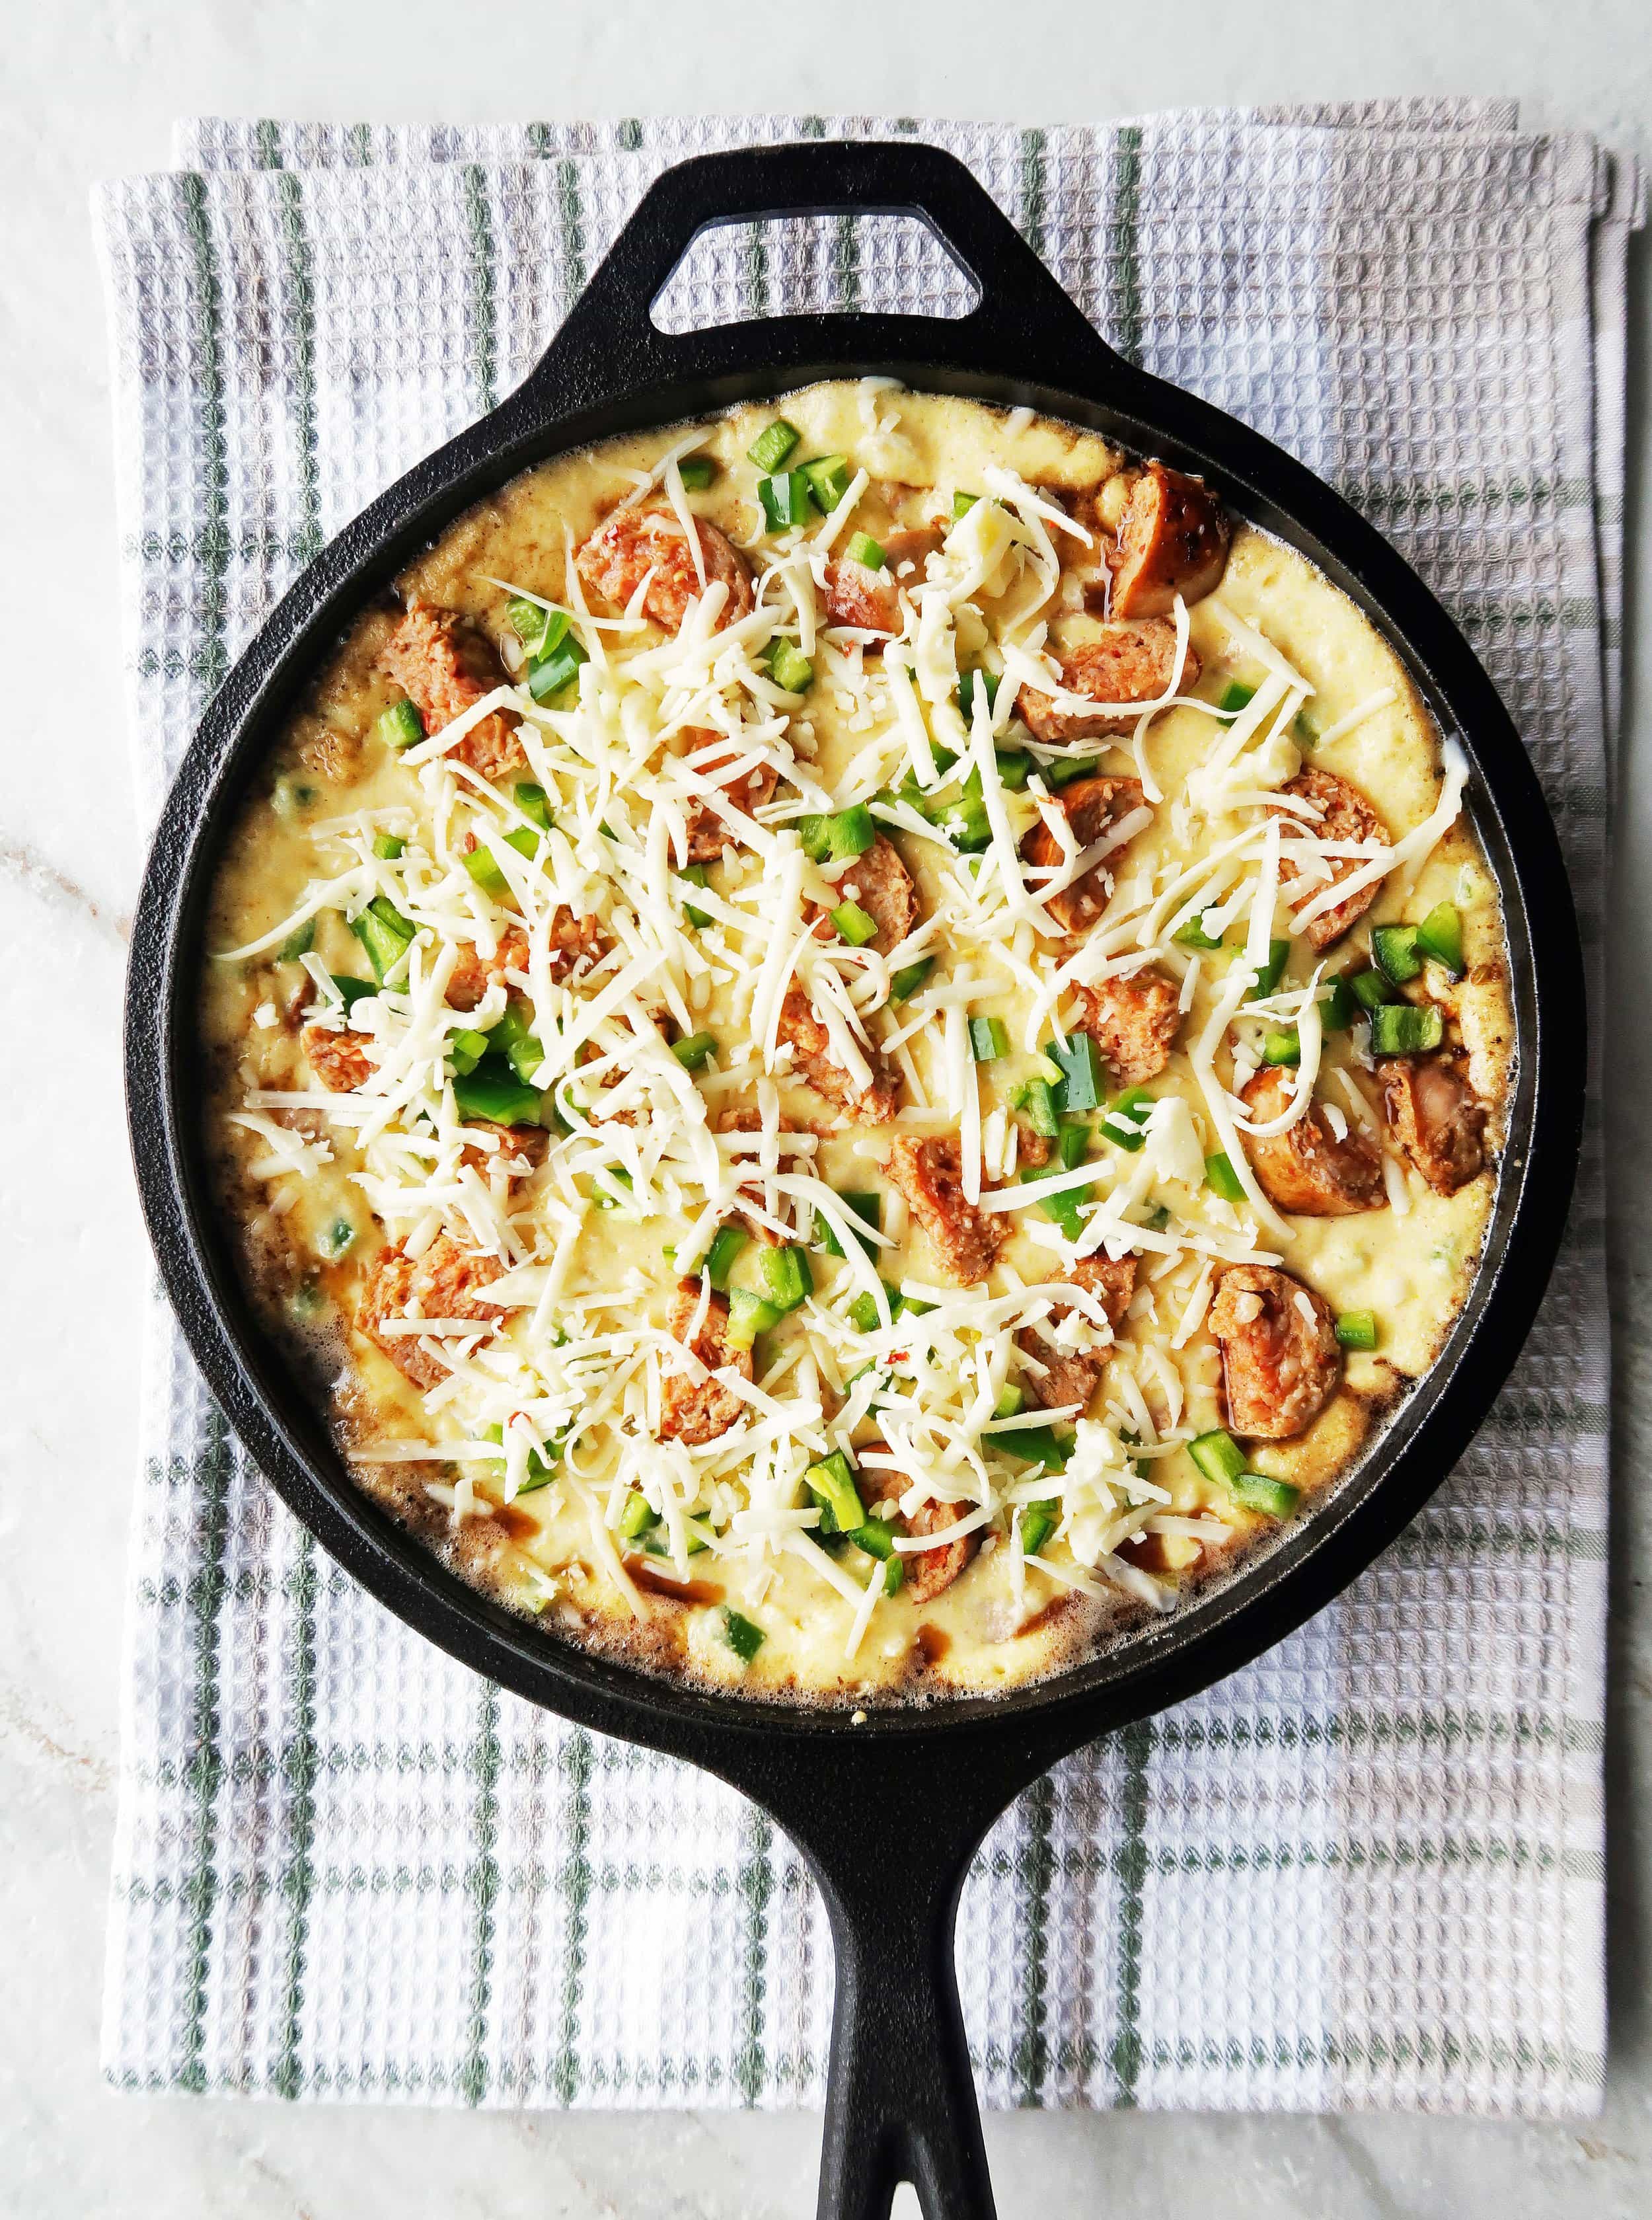 Jalapeño maple and sausage cornbread batter spread on a cast-iron skillet topped with cheese.